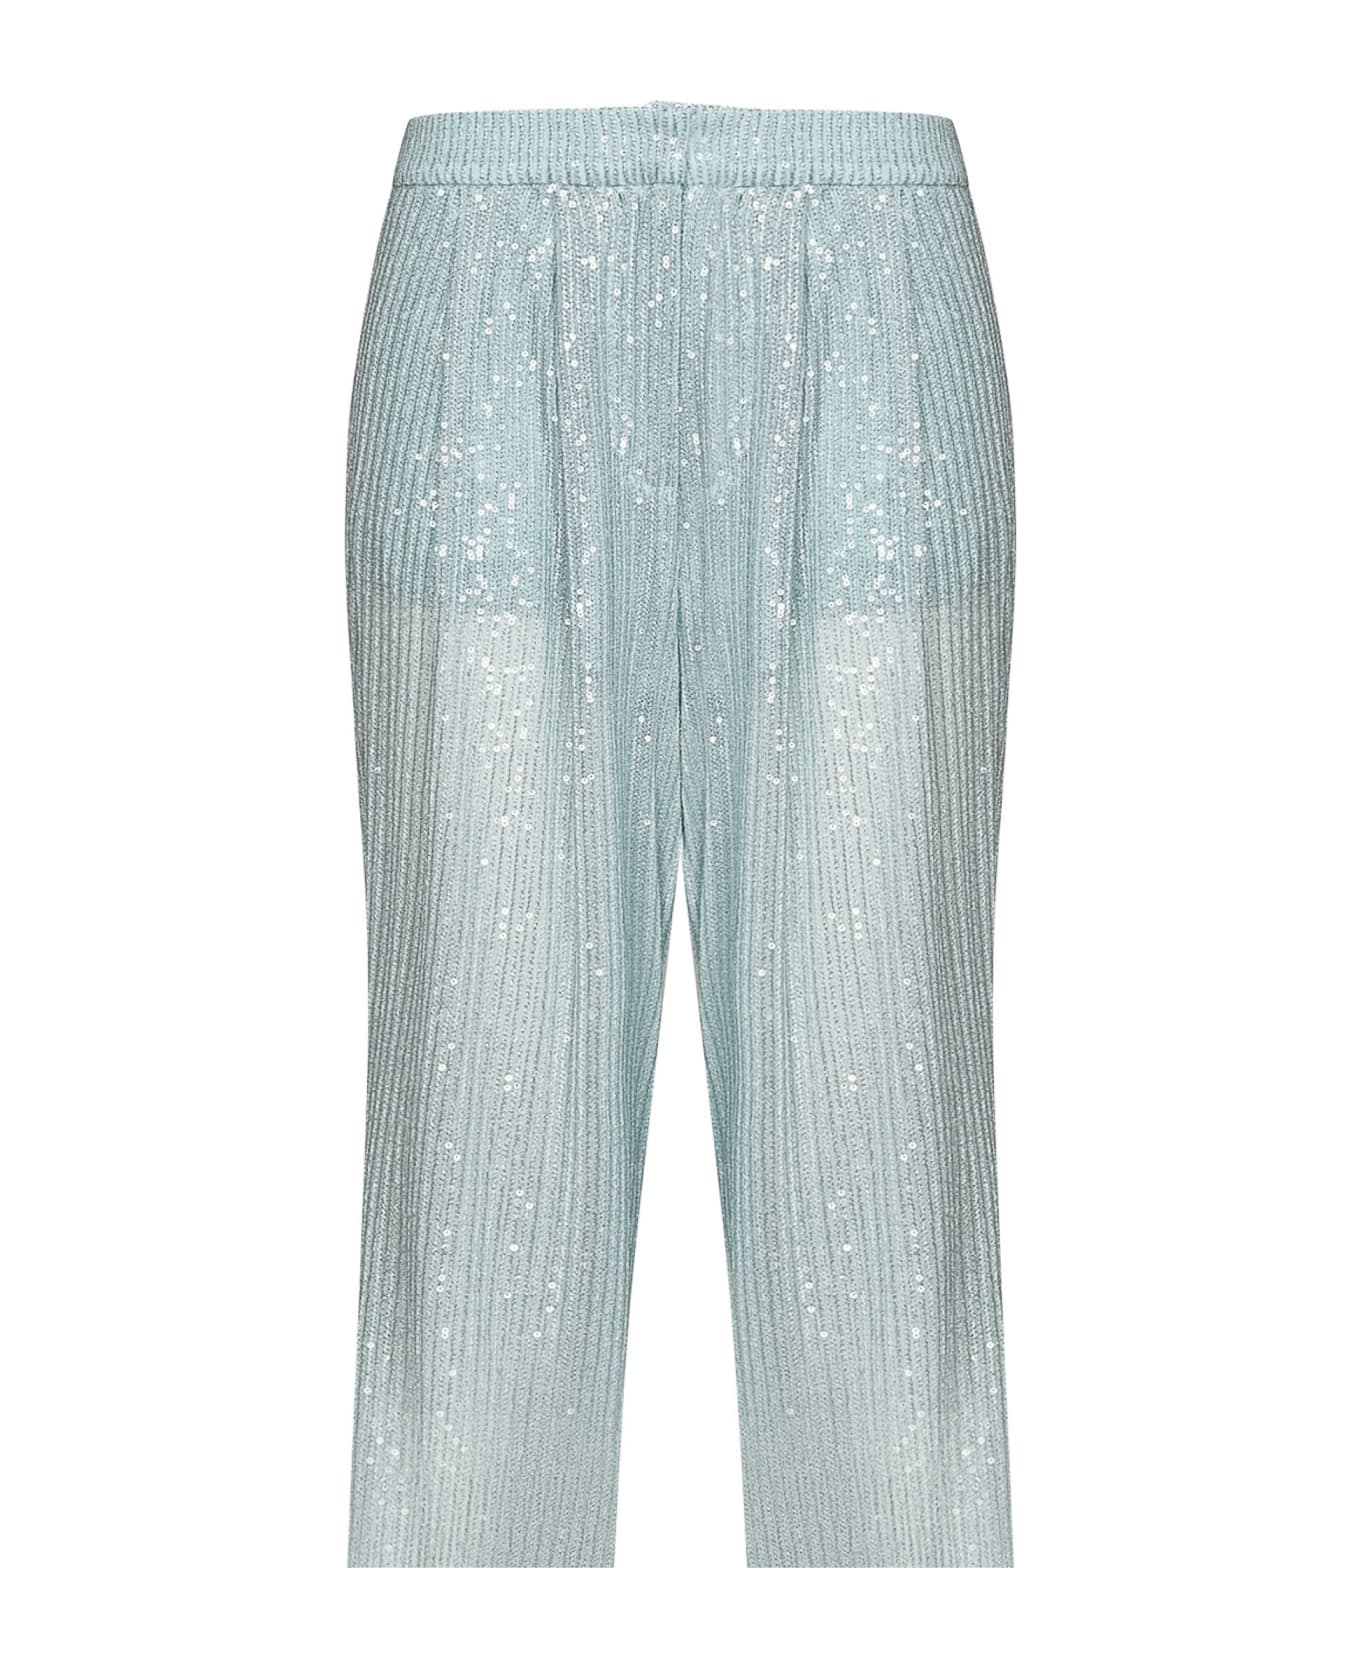 Rotate by Birger Christensen Trousers - Sky Blue